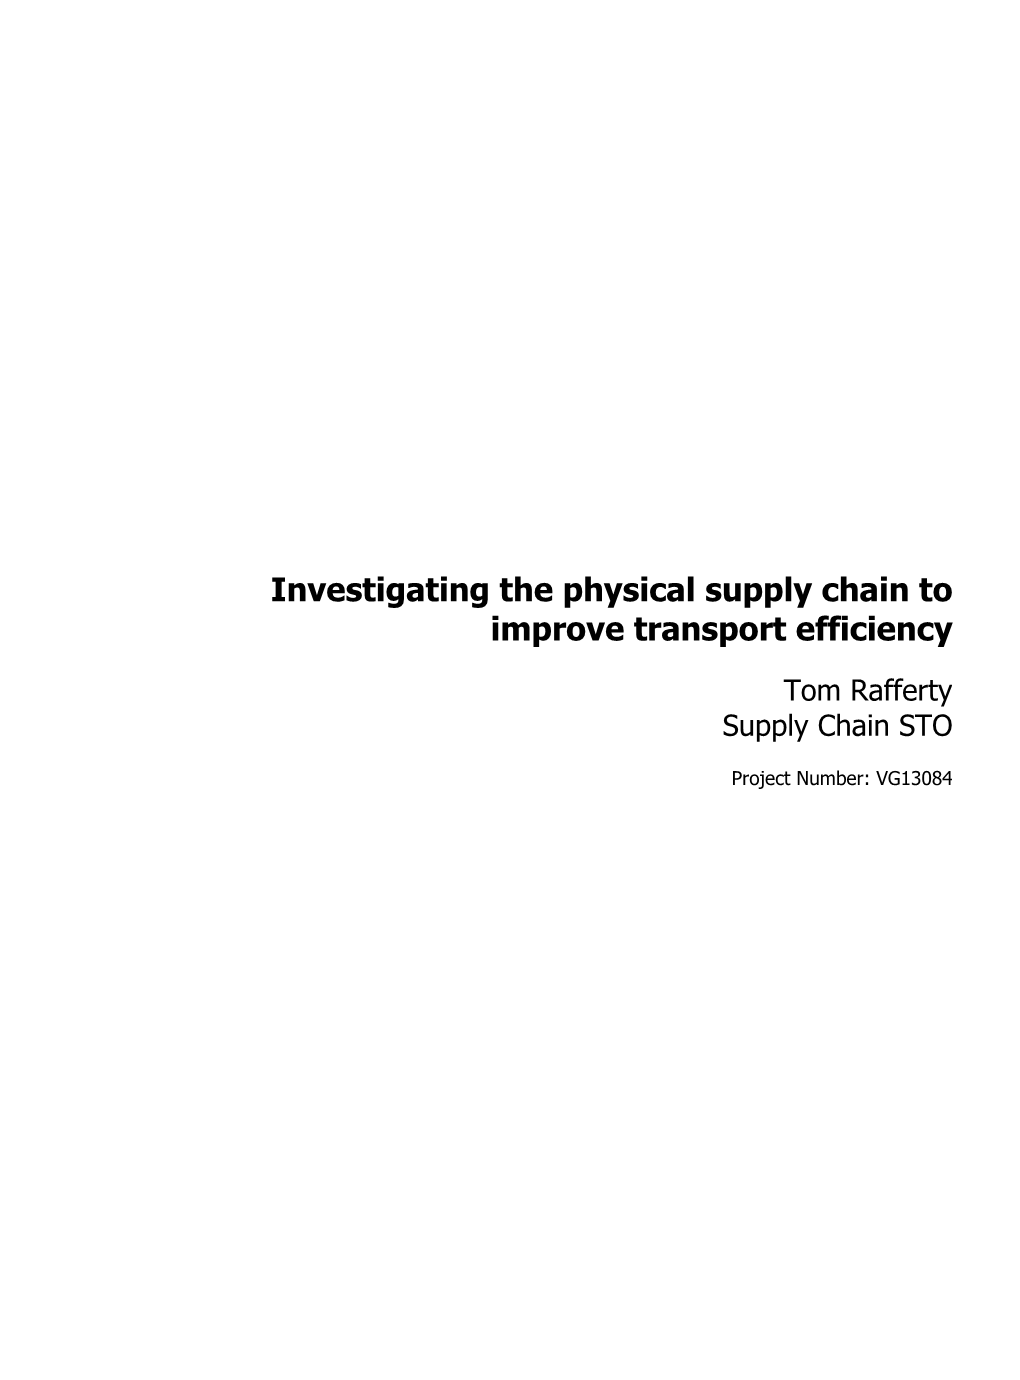 Investigating the Physical Supply Chain to Improve Transport Efficiency